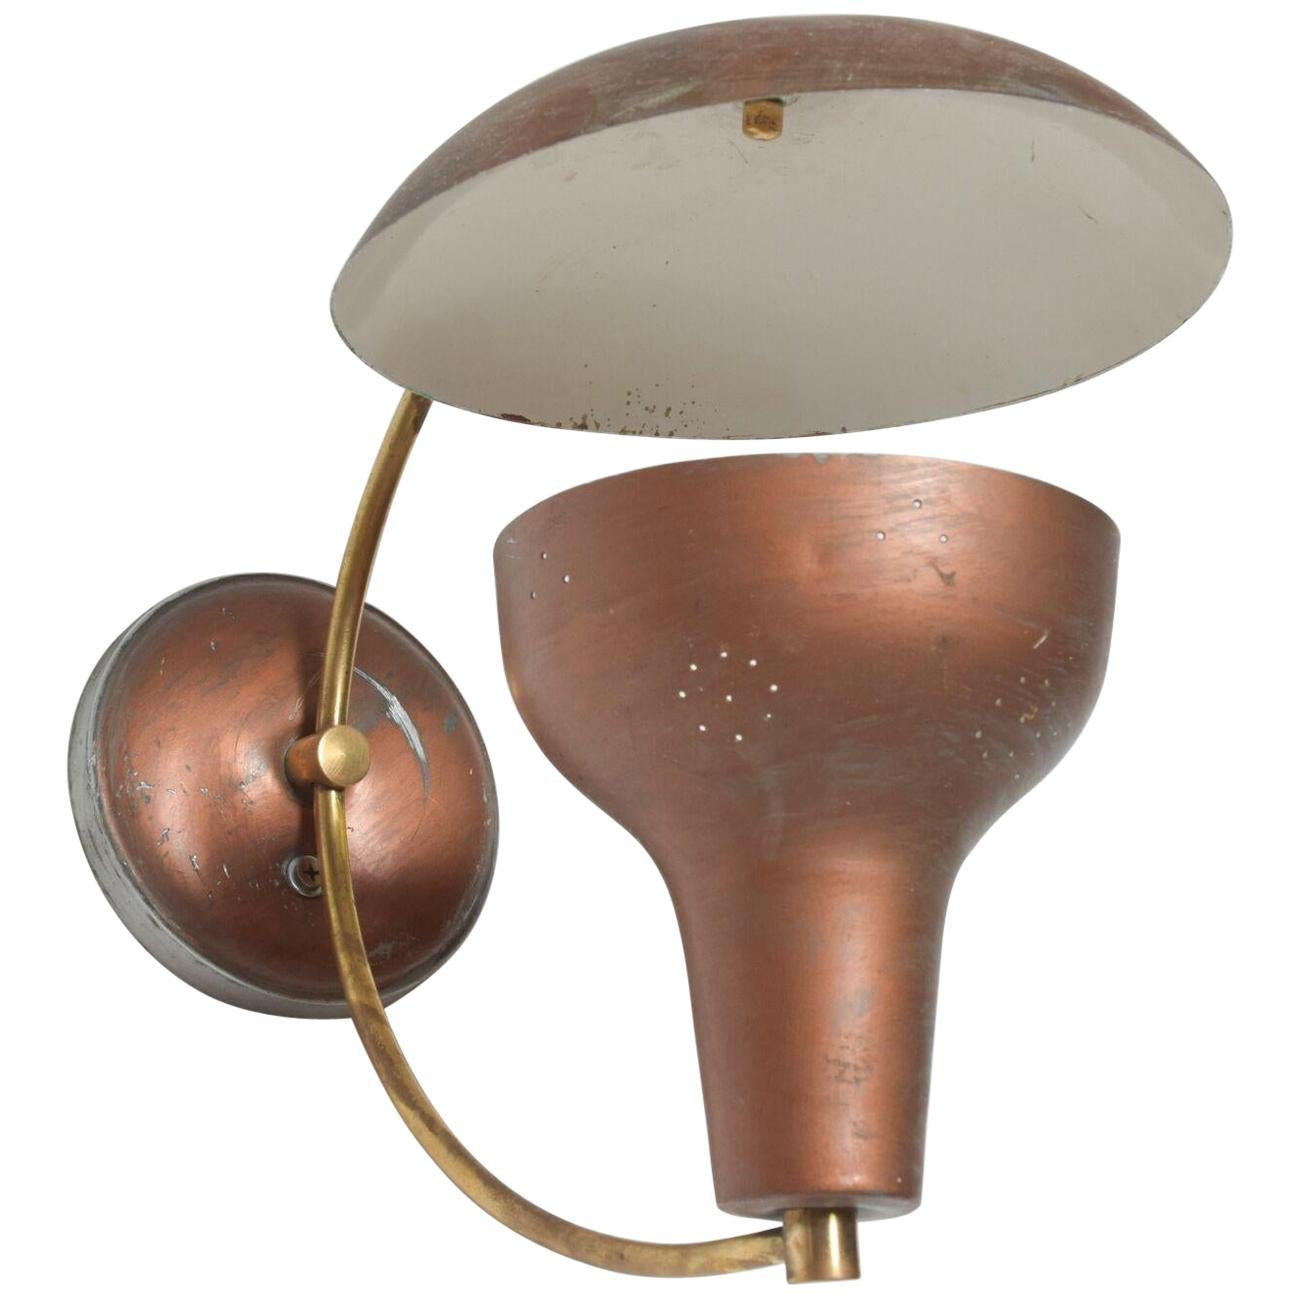  Midcentury Modern Single Brass Wall Lamp Sconce in Brown 1950s Vintage